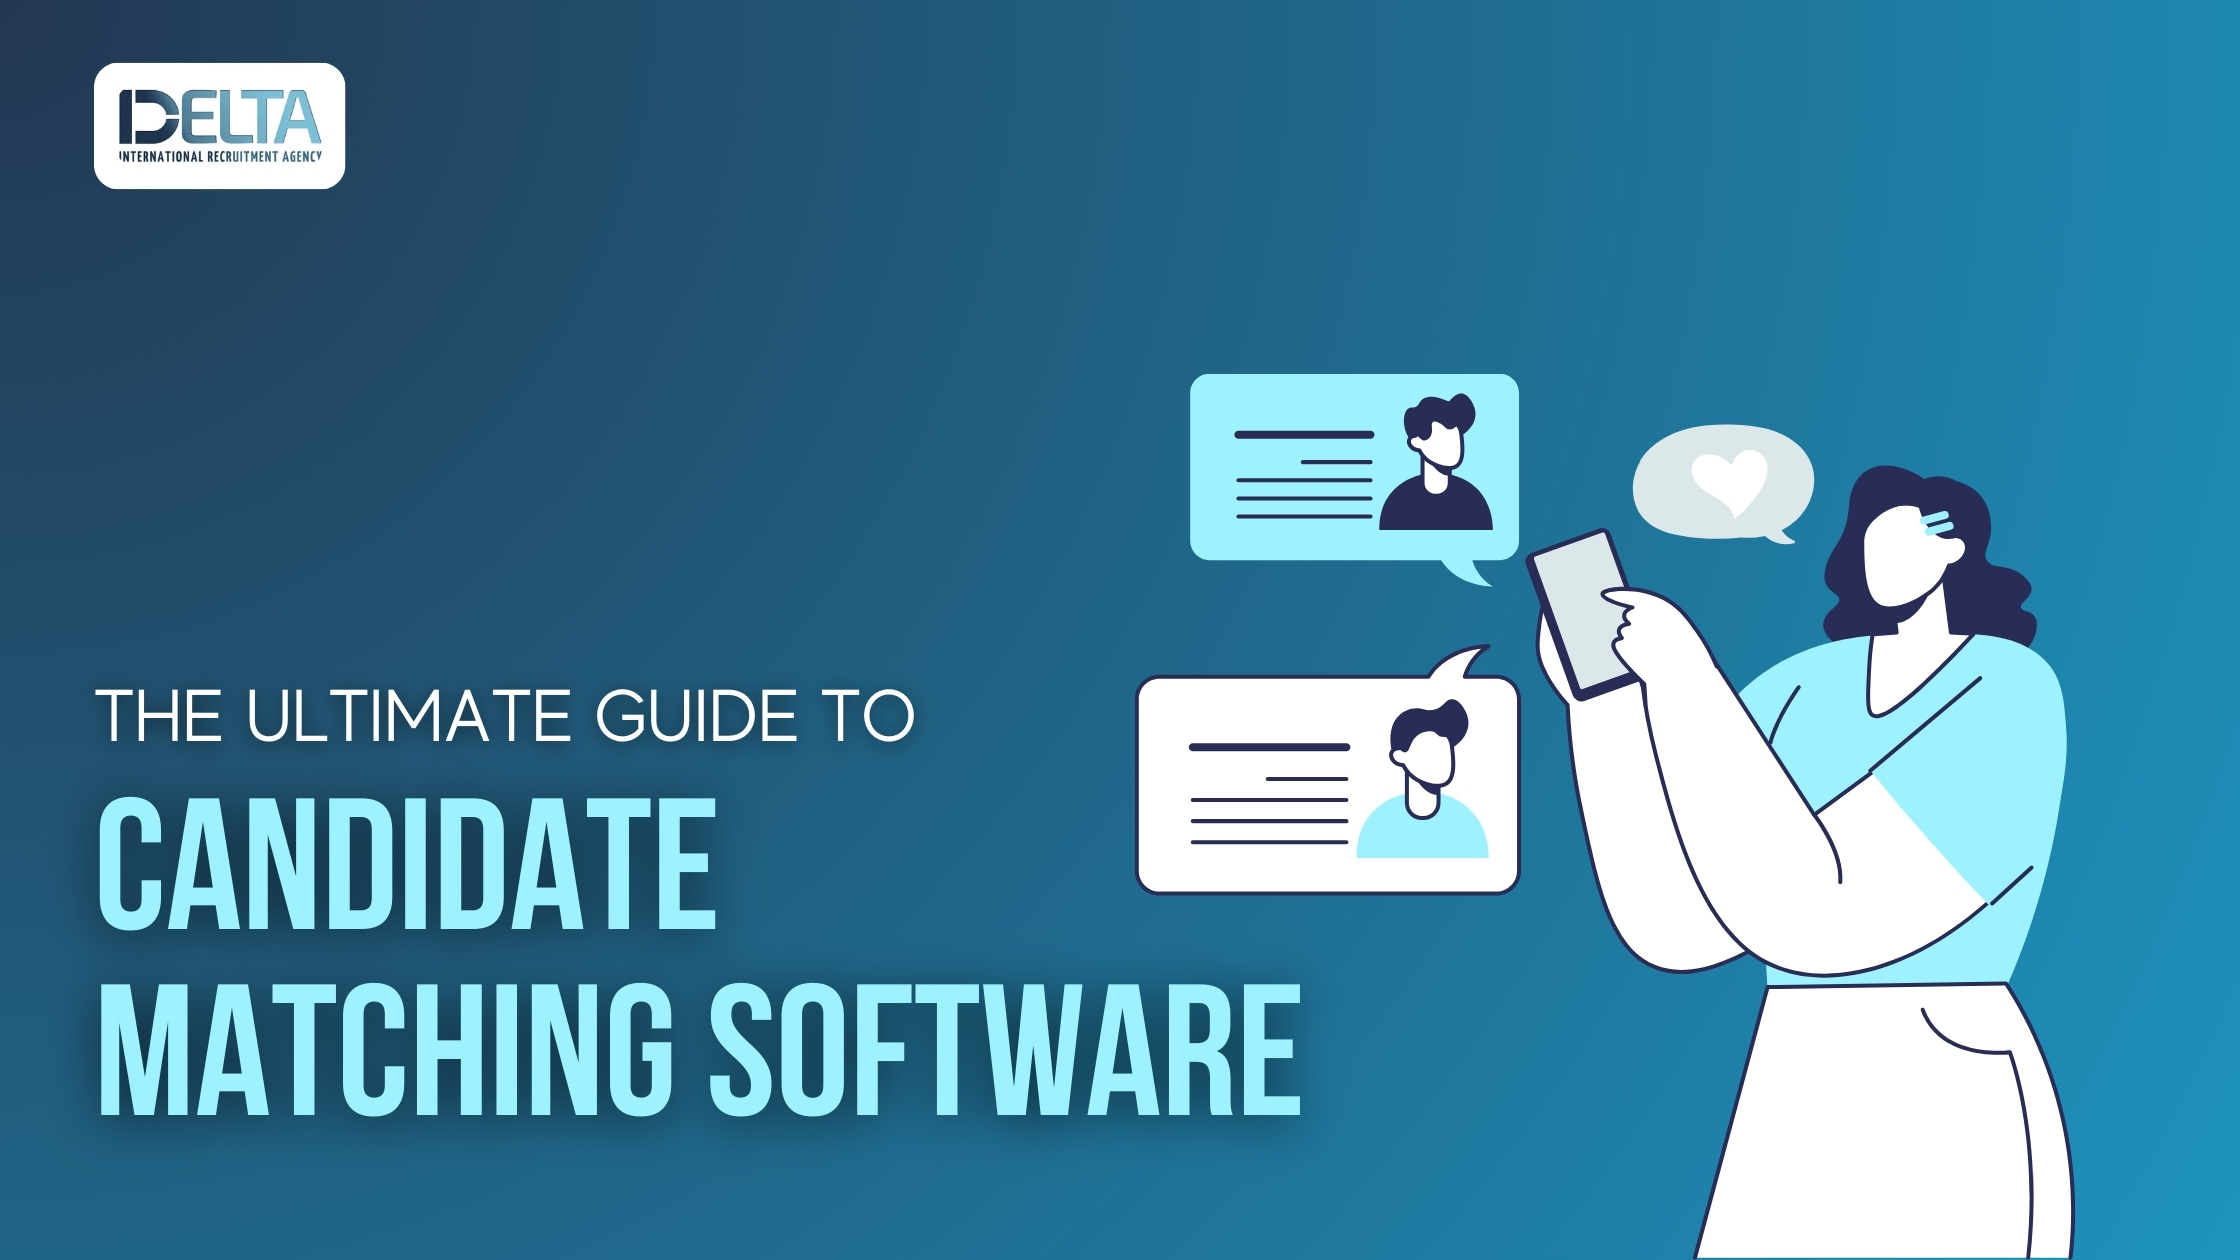 Finding the Perfect Fit: The Ultimate Guide to Candidate Matching Software